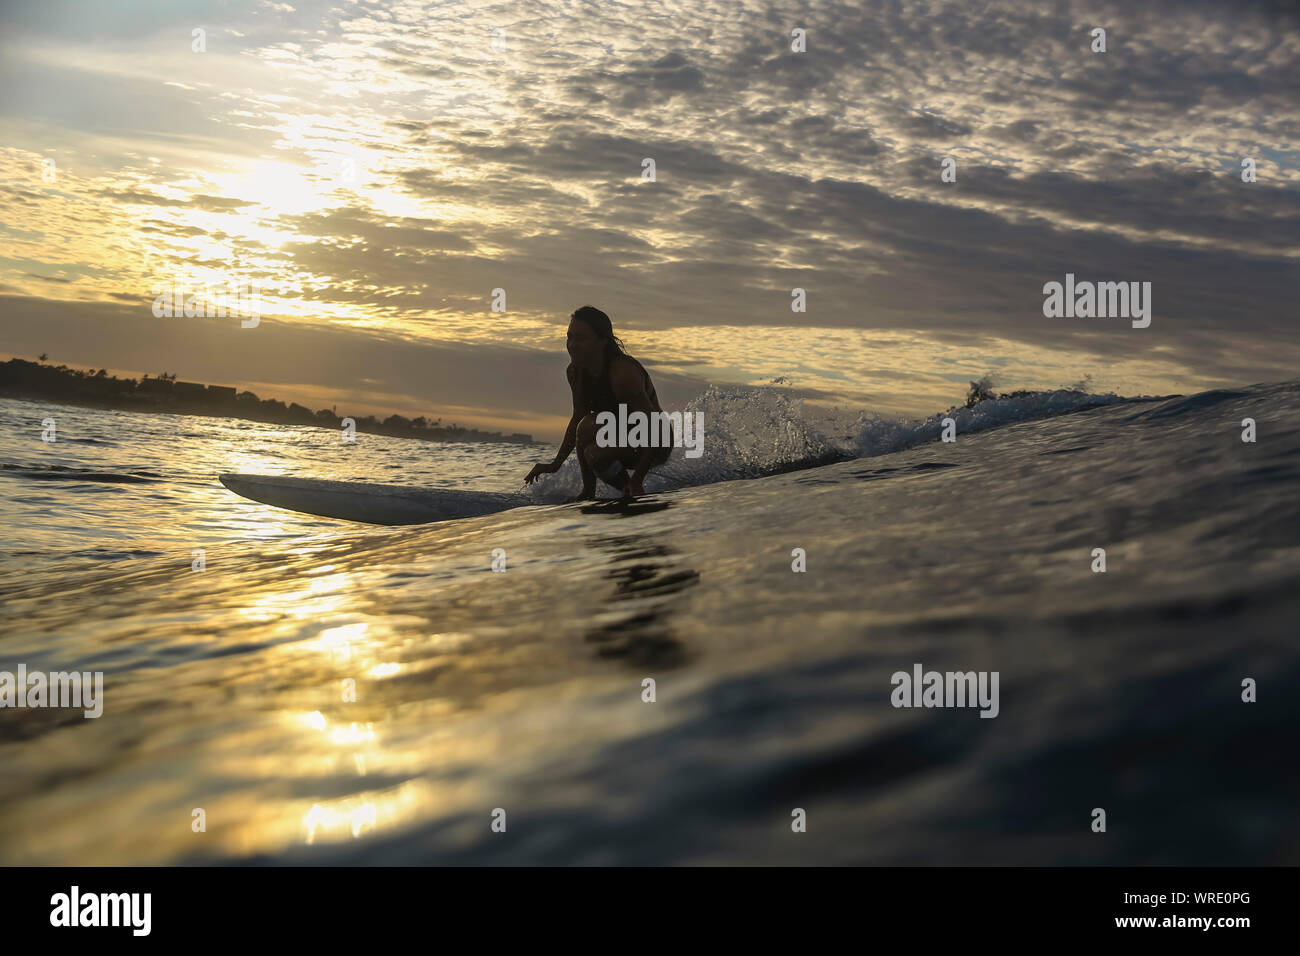 Young woman surfing at sunrise Stock Photo